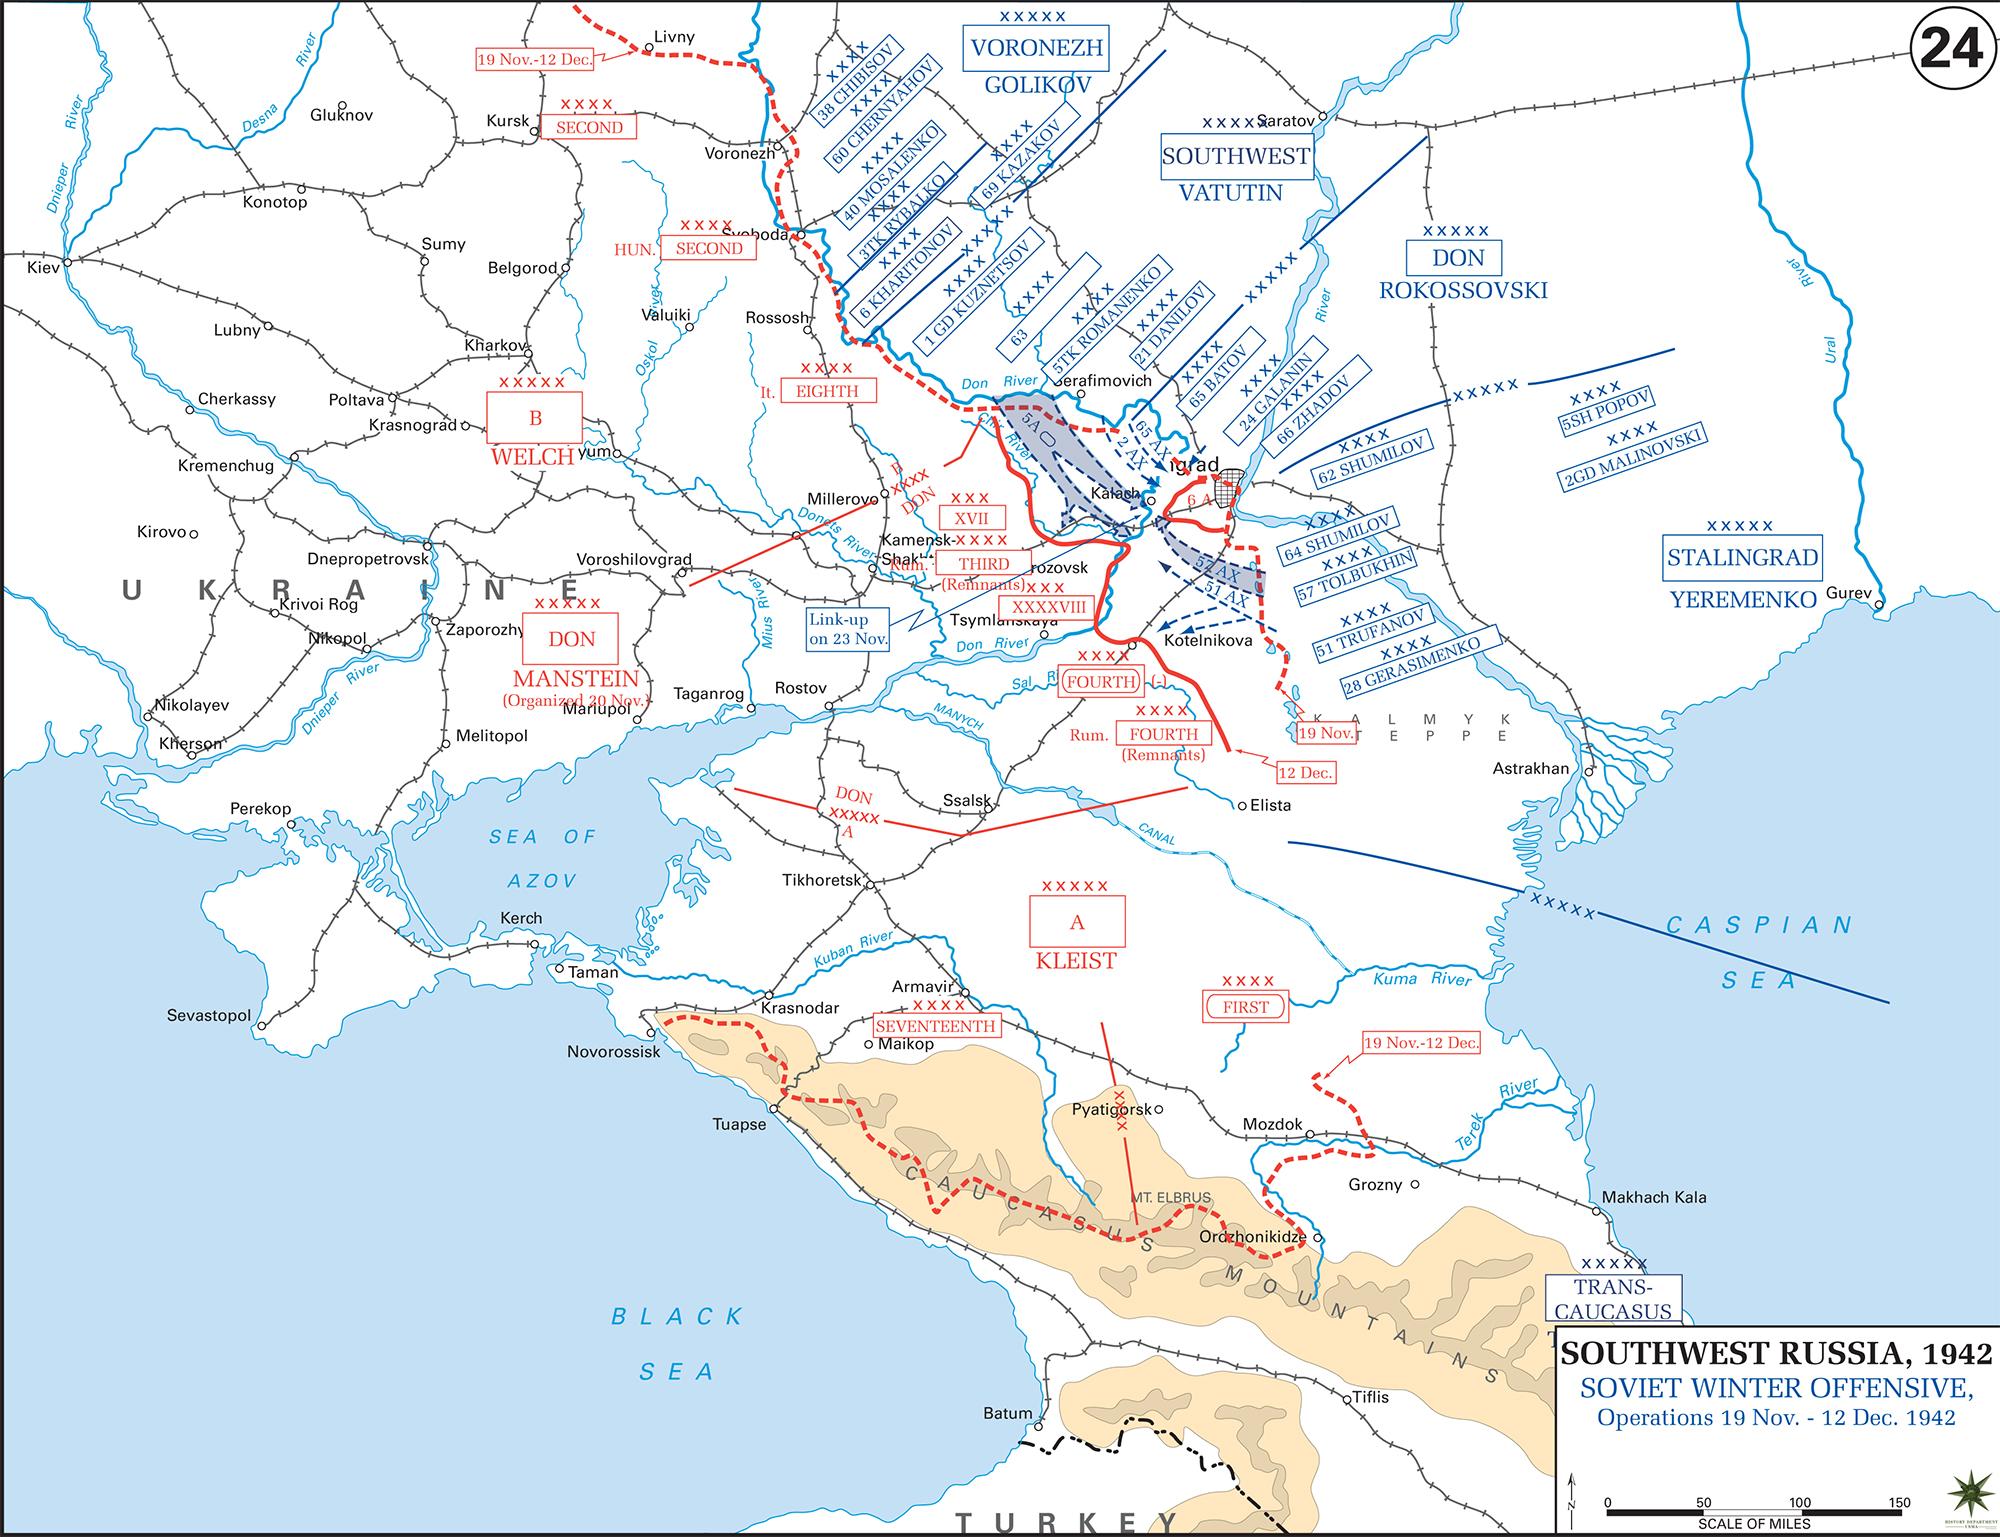 WWII map of the Soviet Winter Offensive November 19 - December 12, 1942